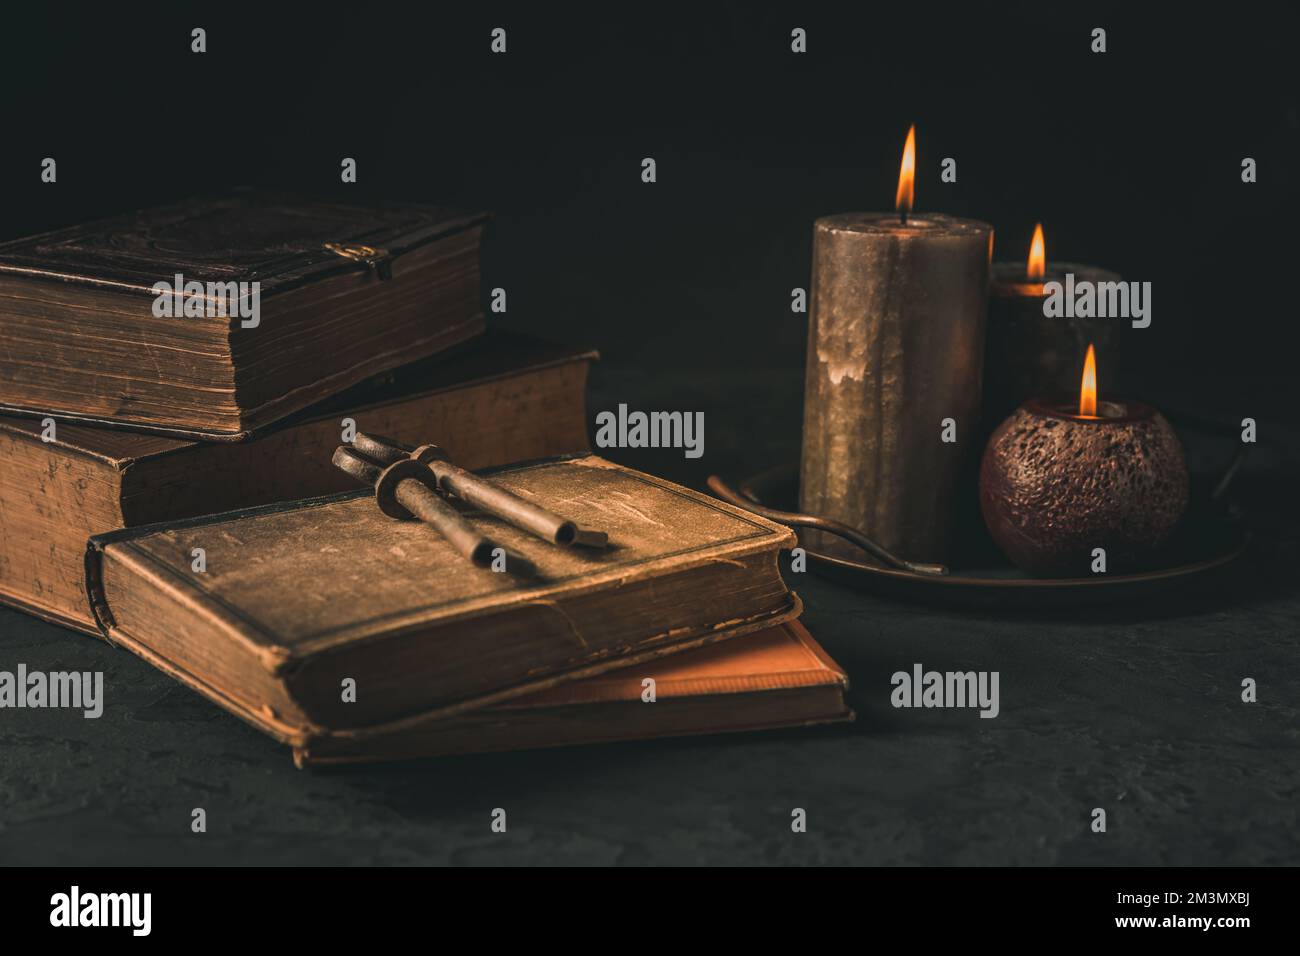 Pile of old antique books with candle and old rusty keys in vintage style on black background Stock Photo